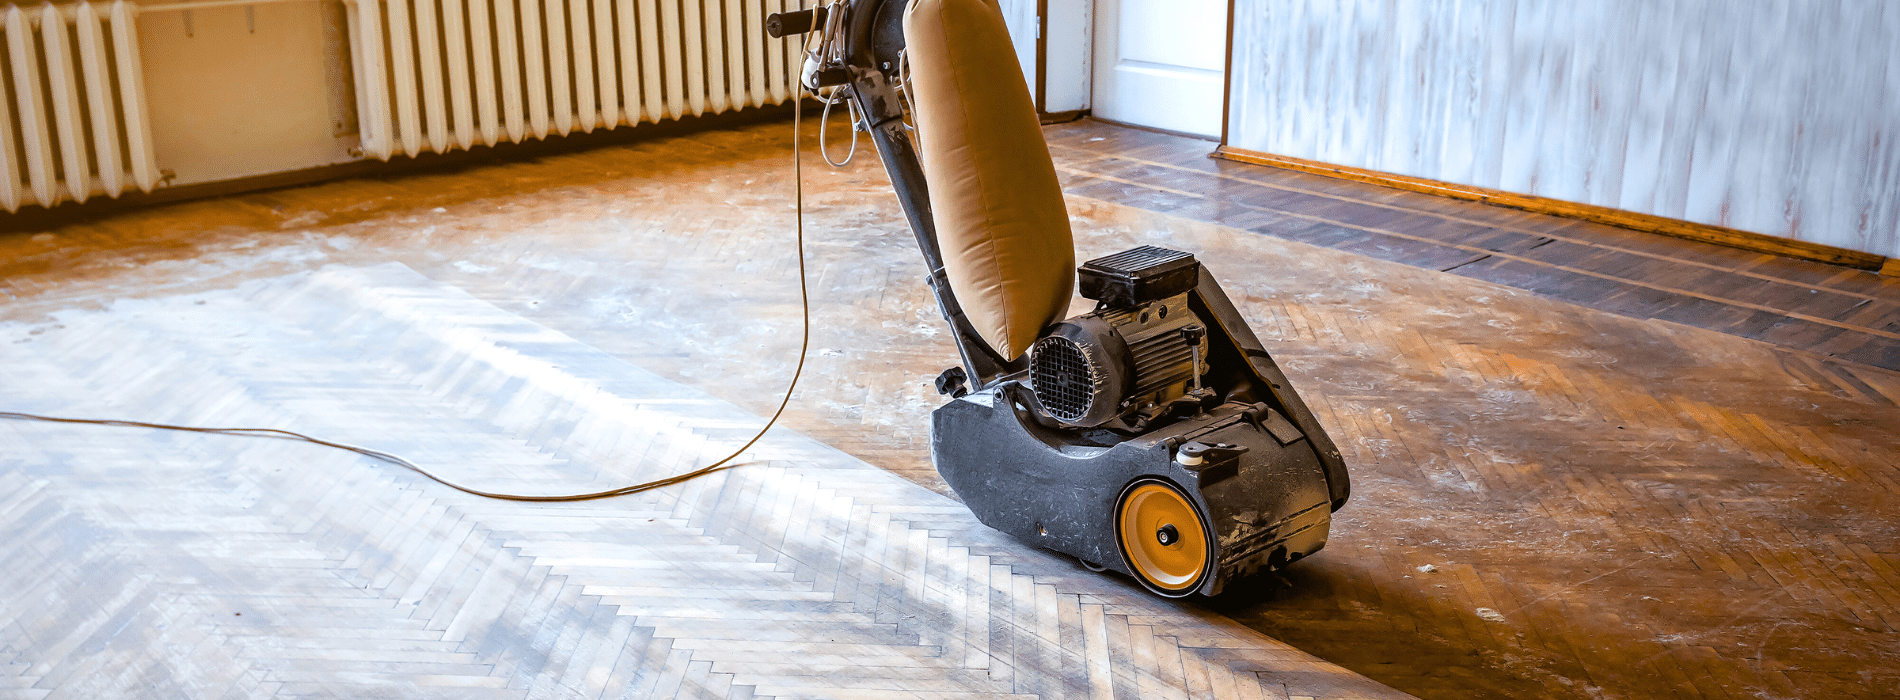 In Cudham, TN14, Mr Sander® using Bona Scorpion, a 200mm drum sander (1.5 kW, 240V, 50Hz) connected to a HEPA-filtered dust extraction system, to get clean and efficient results for hardwood floor sanding.